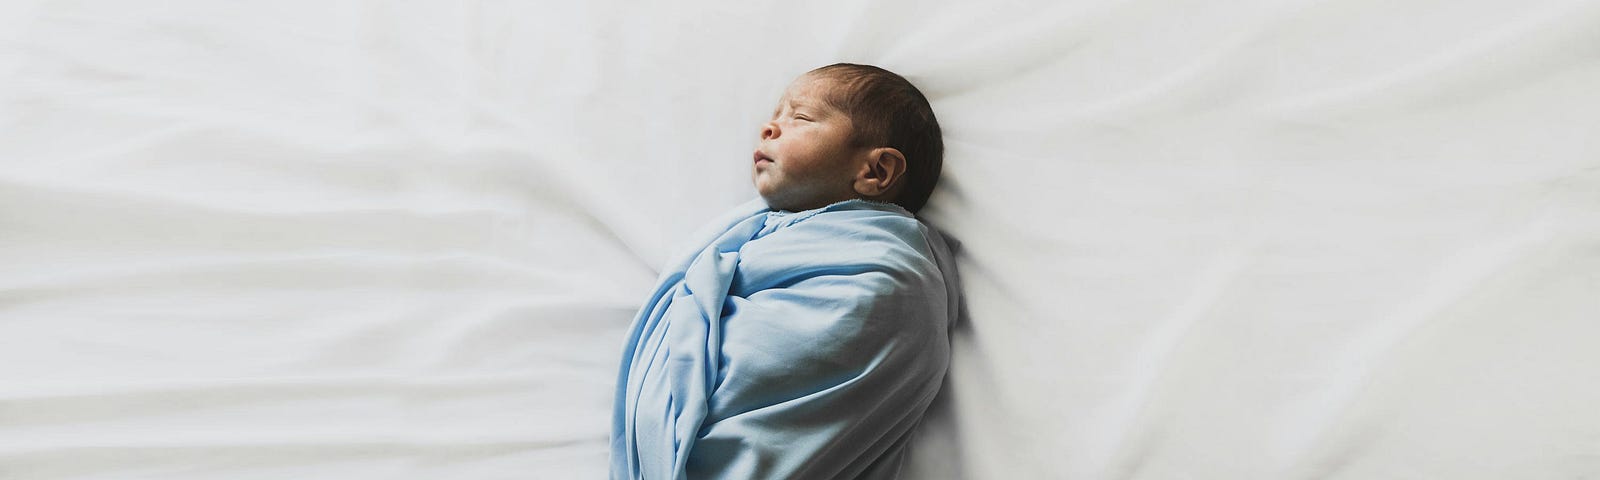 Swaddled newborn baby in a blue blanket on a white sheet